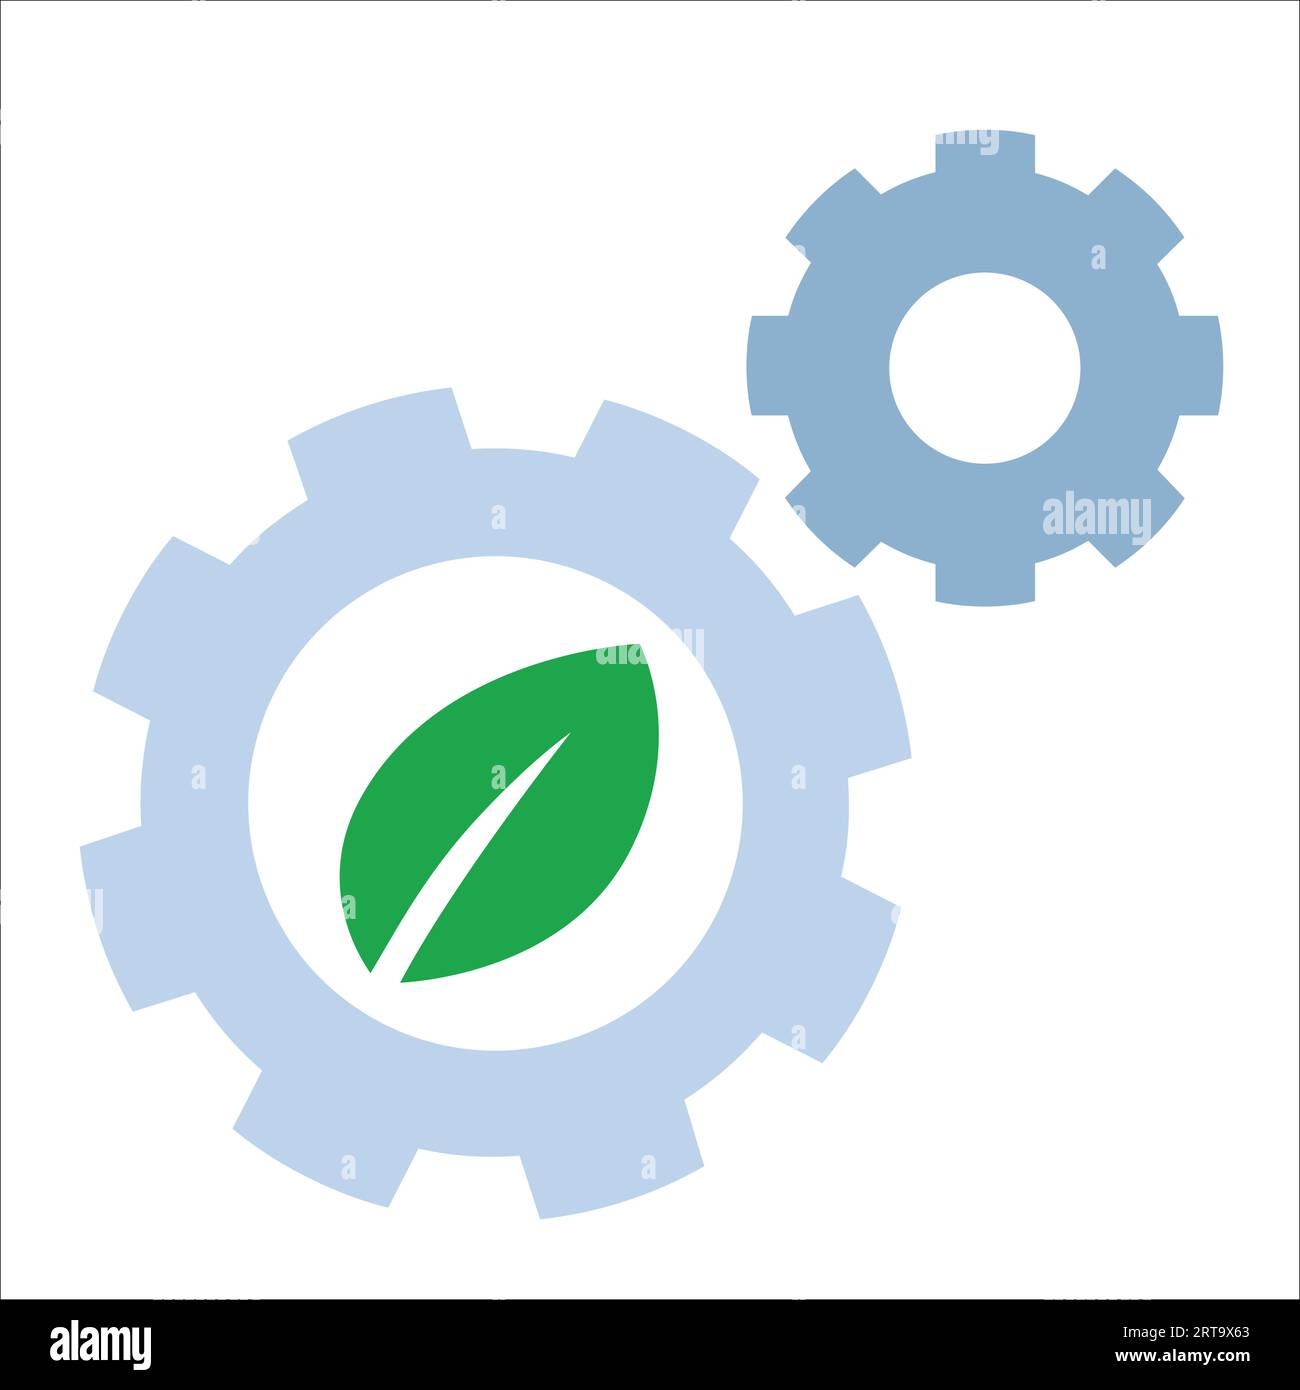 interconnected gear with green leaf icon symbol of cooperation partnership management for eco friendly sustainable environment system Stock Vector